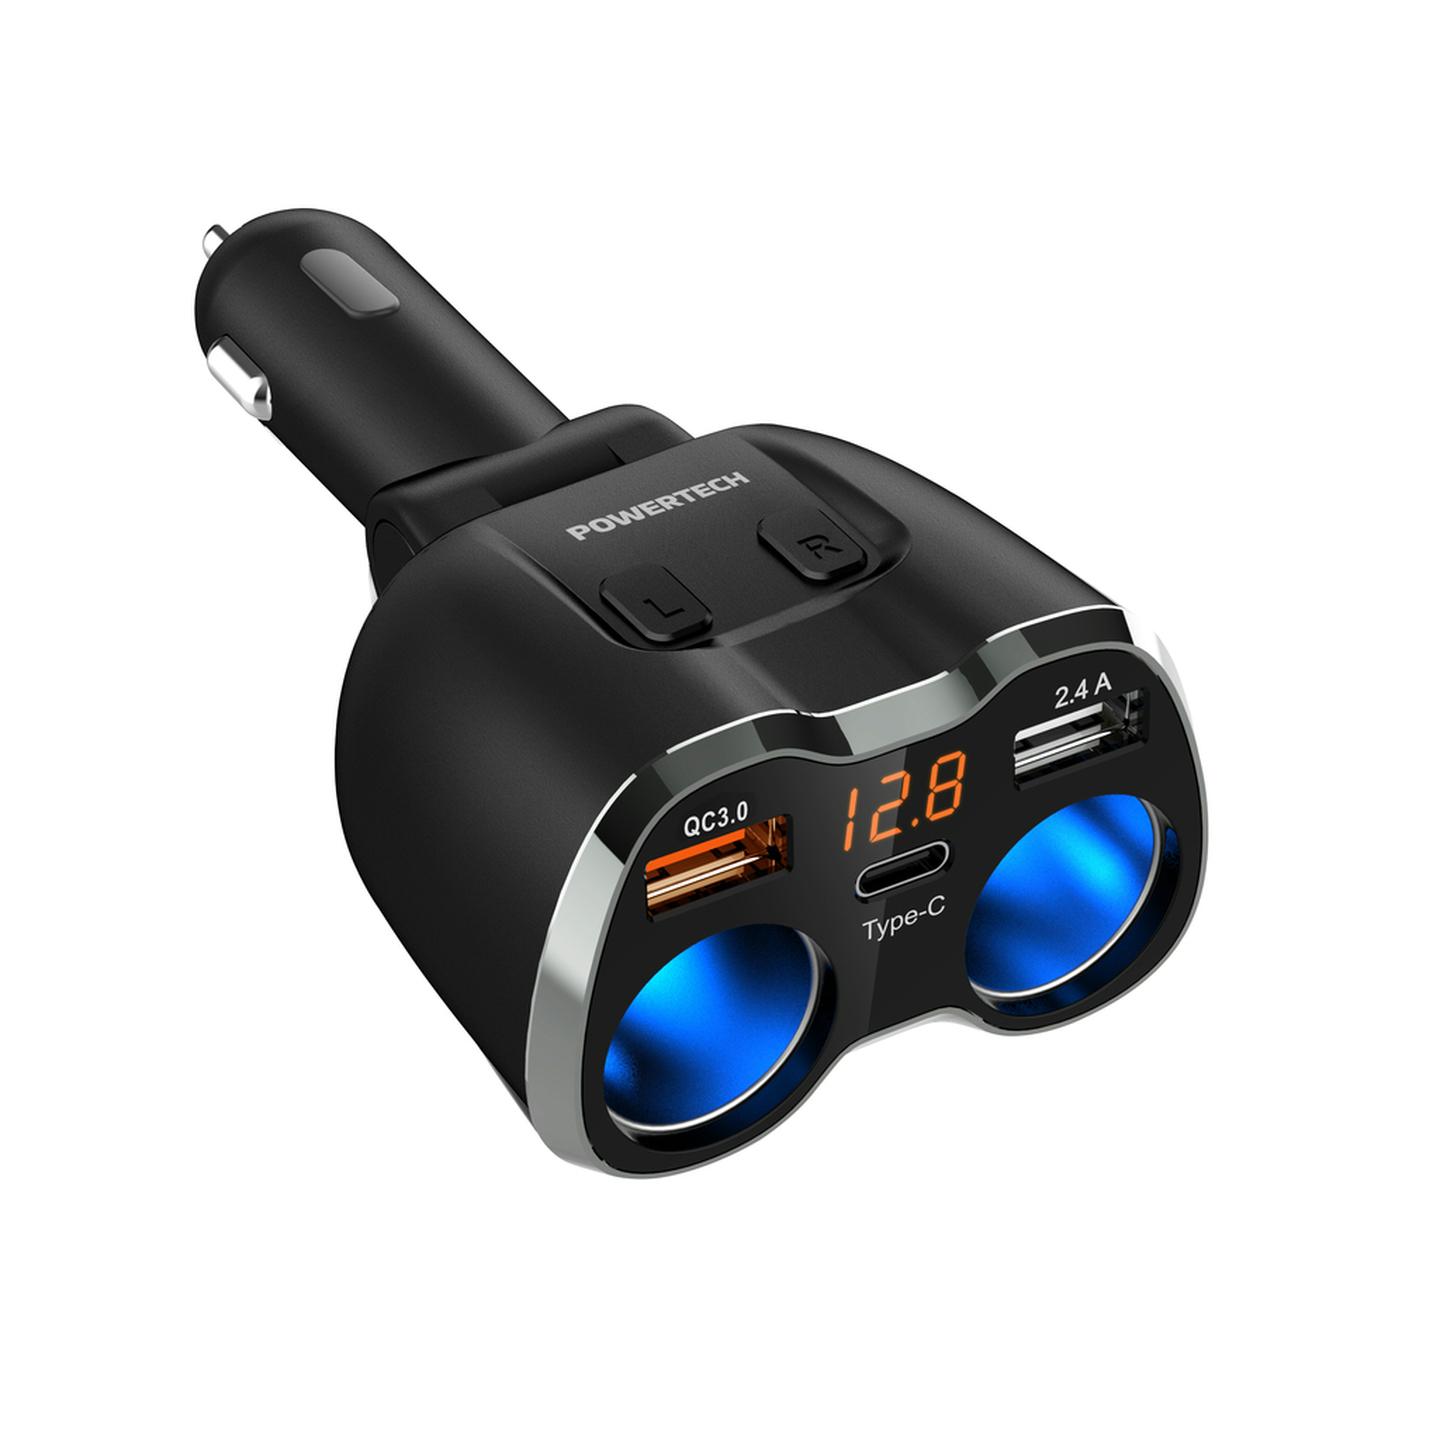 Dual Car Cigarette Lighter Adaptor with 3 x USB Charging Ports and Voltmeter